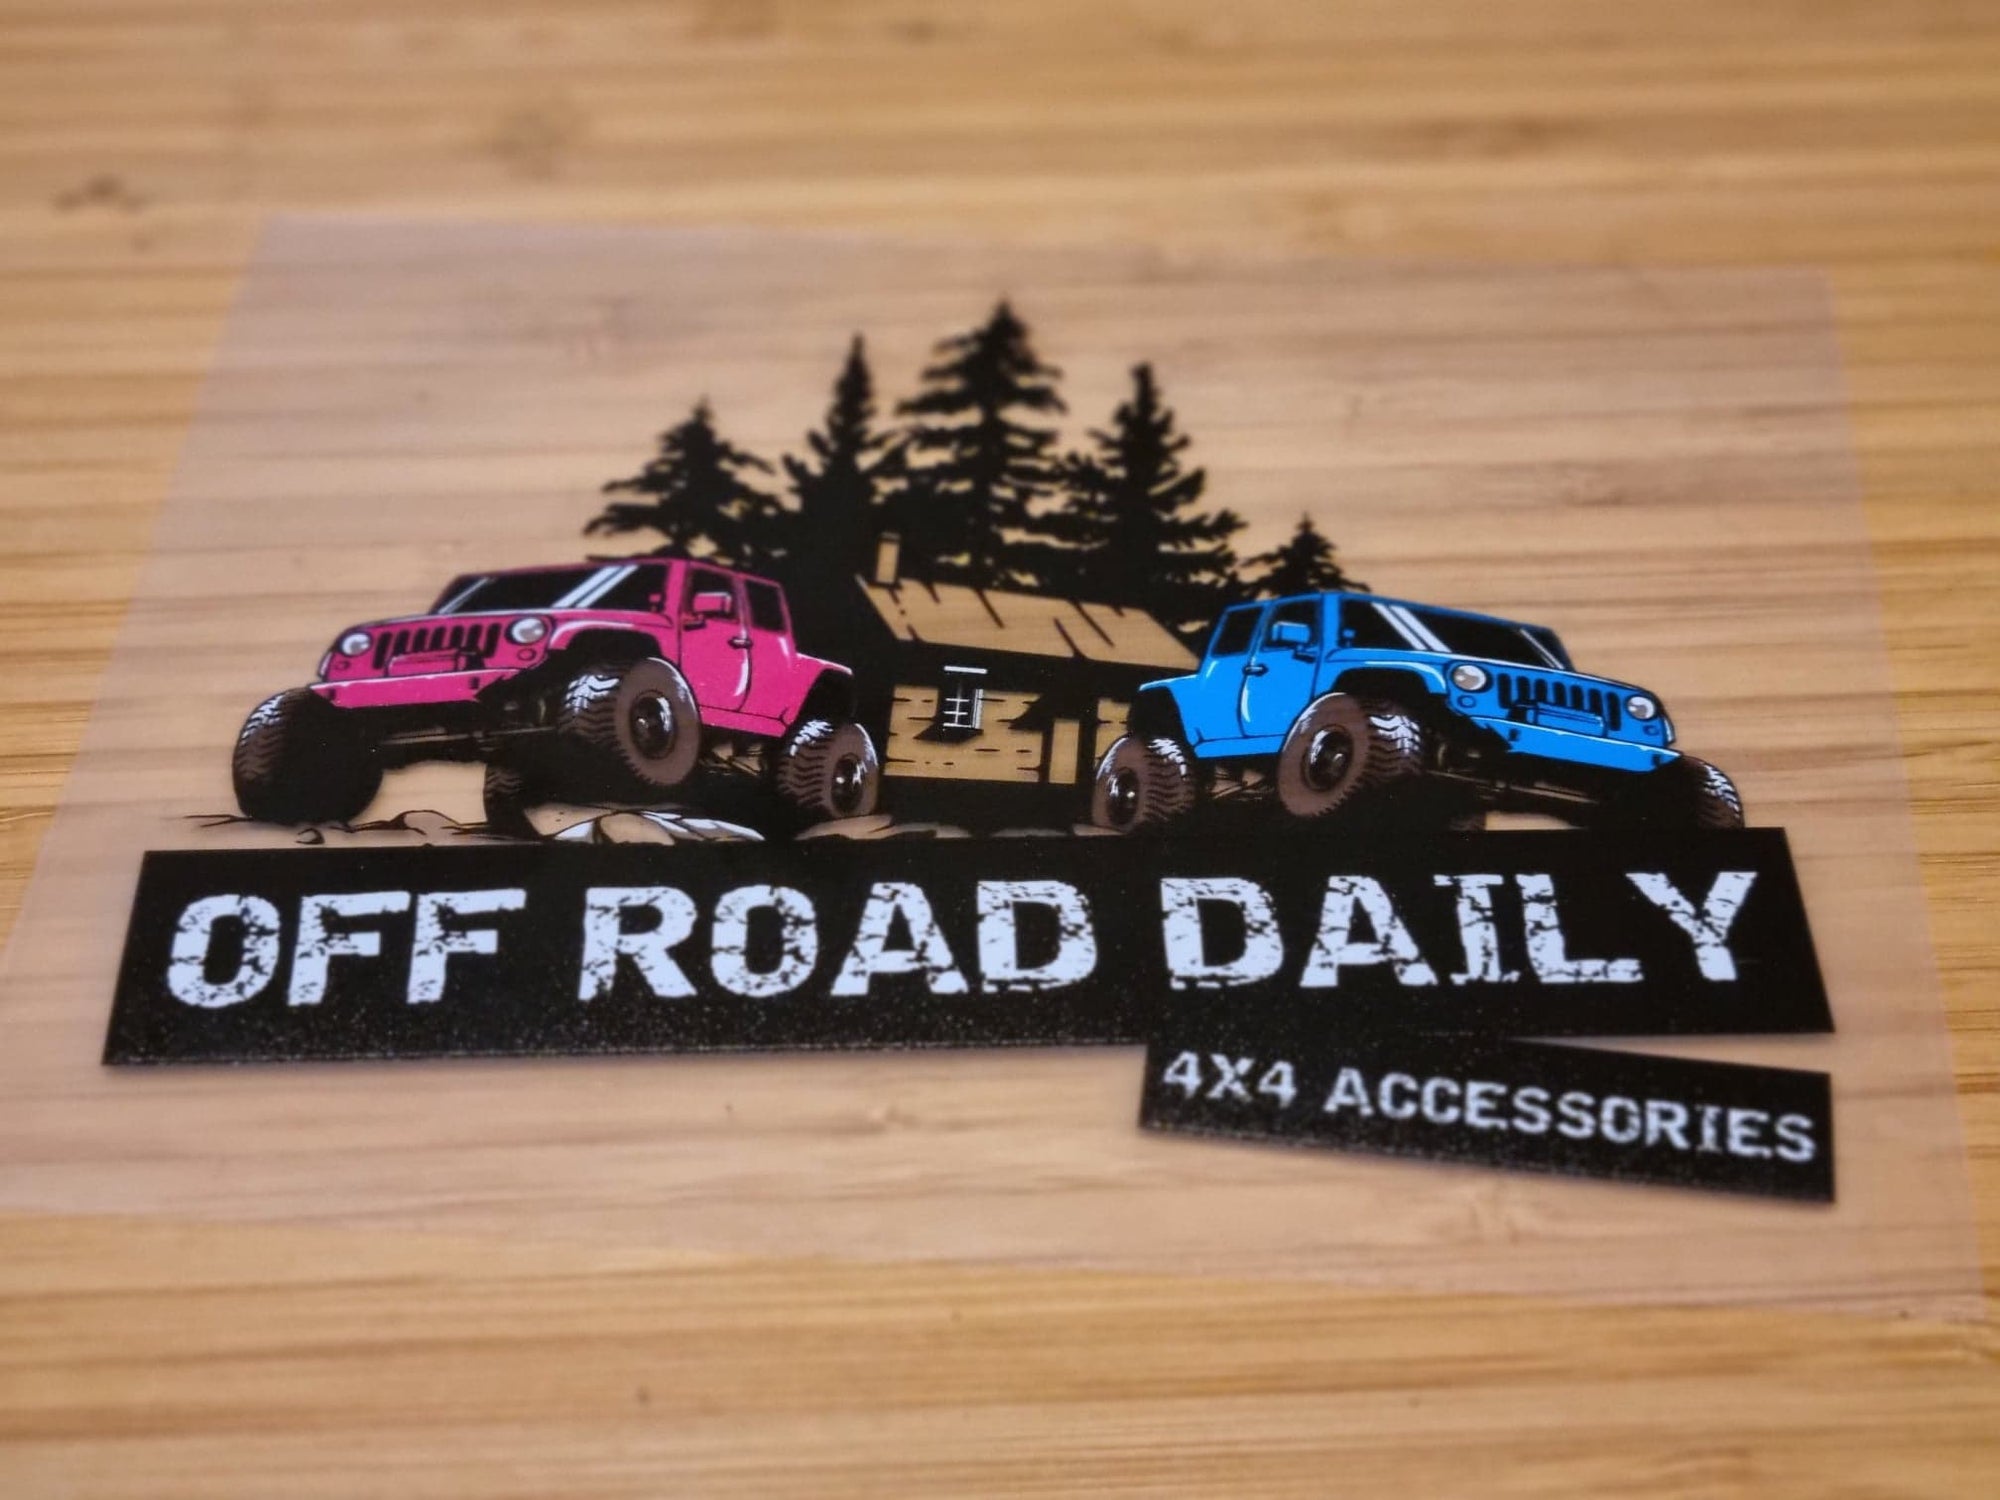 Offroad daily - 4x4 accessories